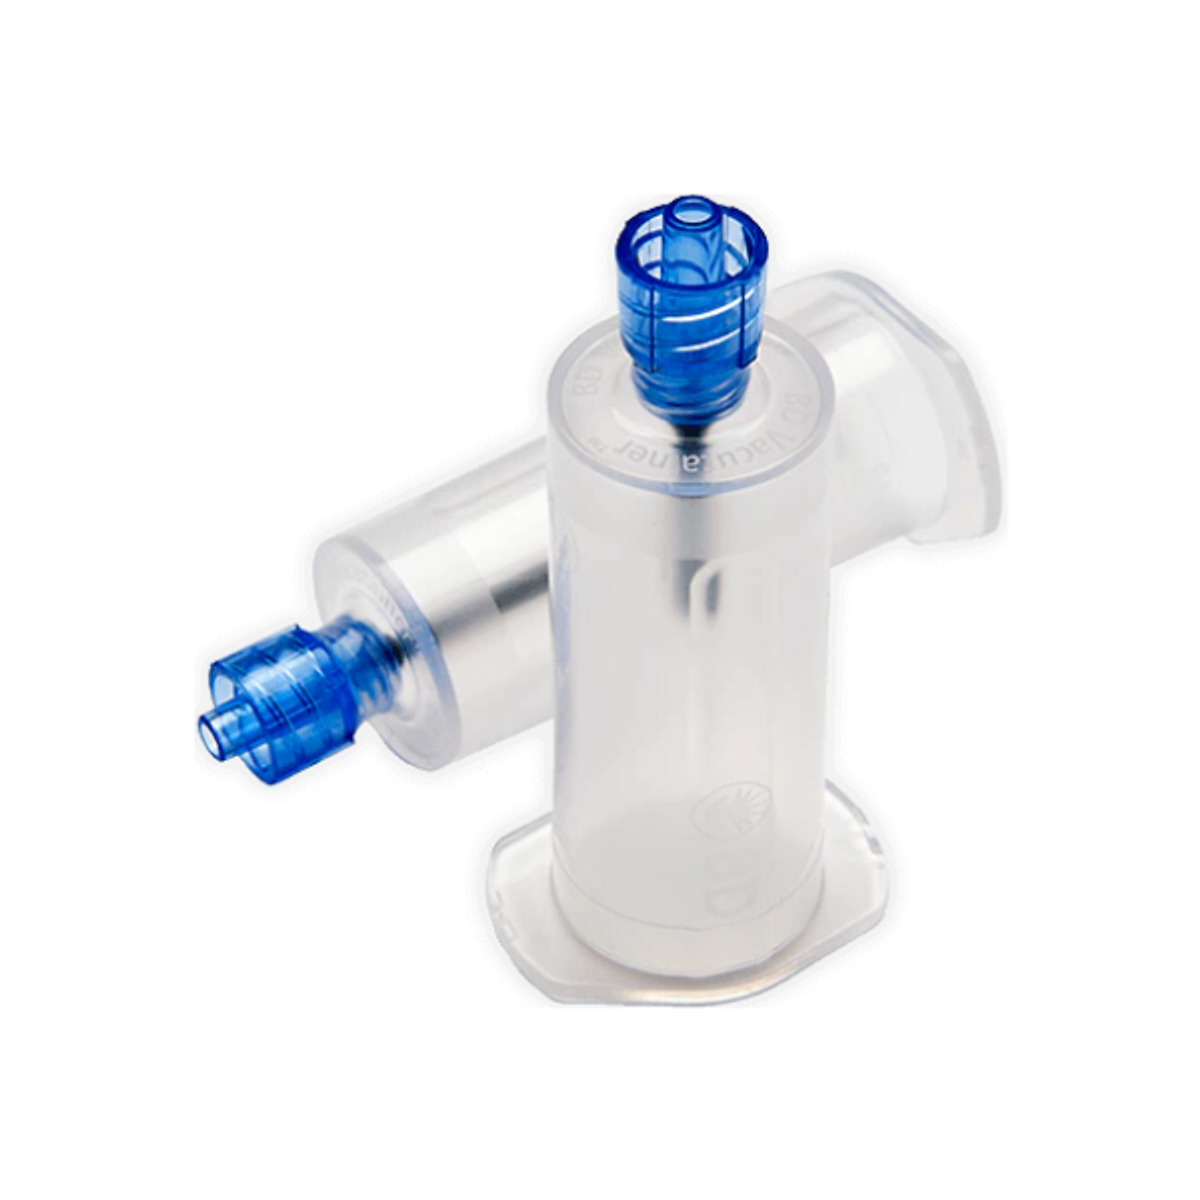 BD Vacutainer Luer Adapters